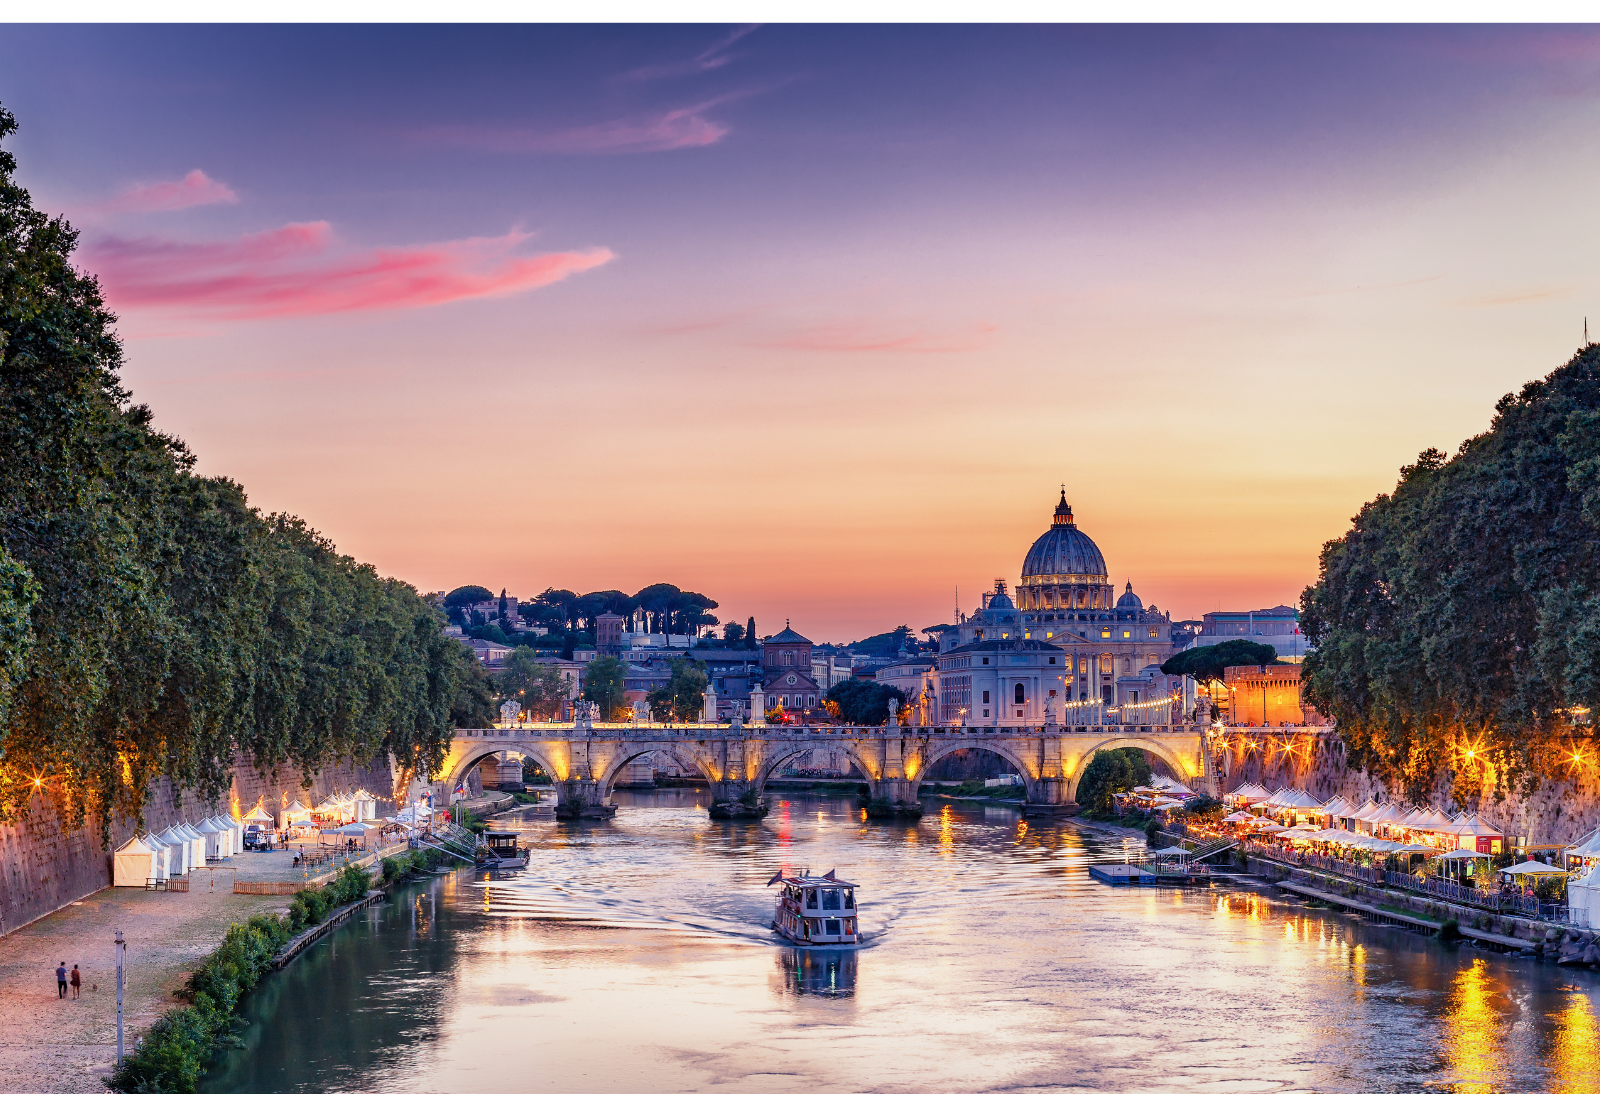 Picture of the tiber river in rome with st pauls in the background for How to Find Flights to Italy from NYC Using Points and Miles